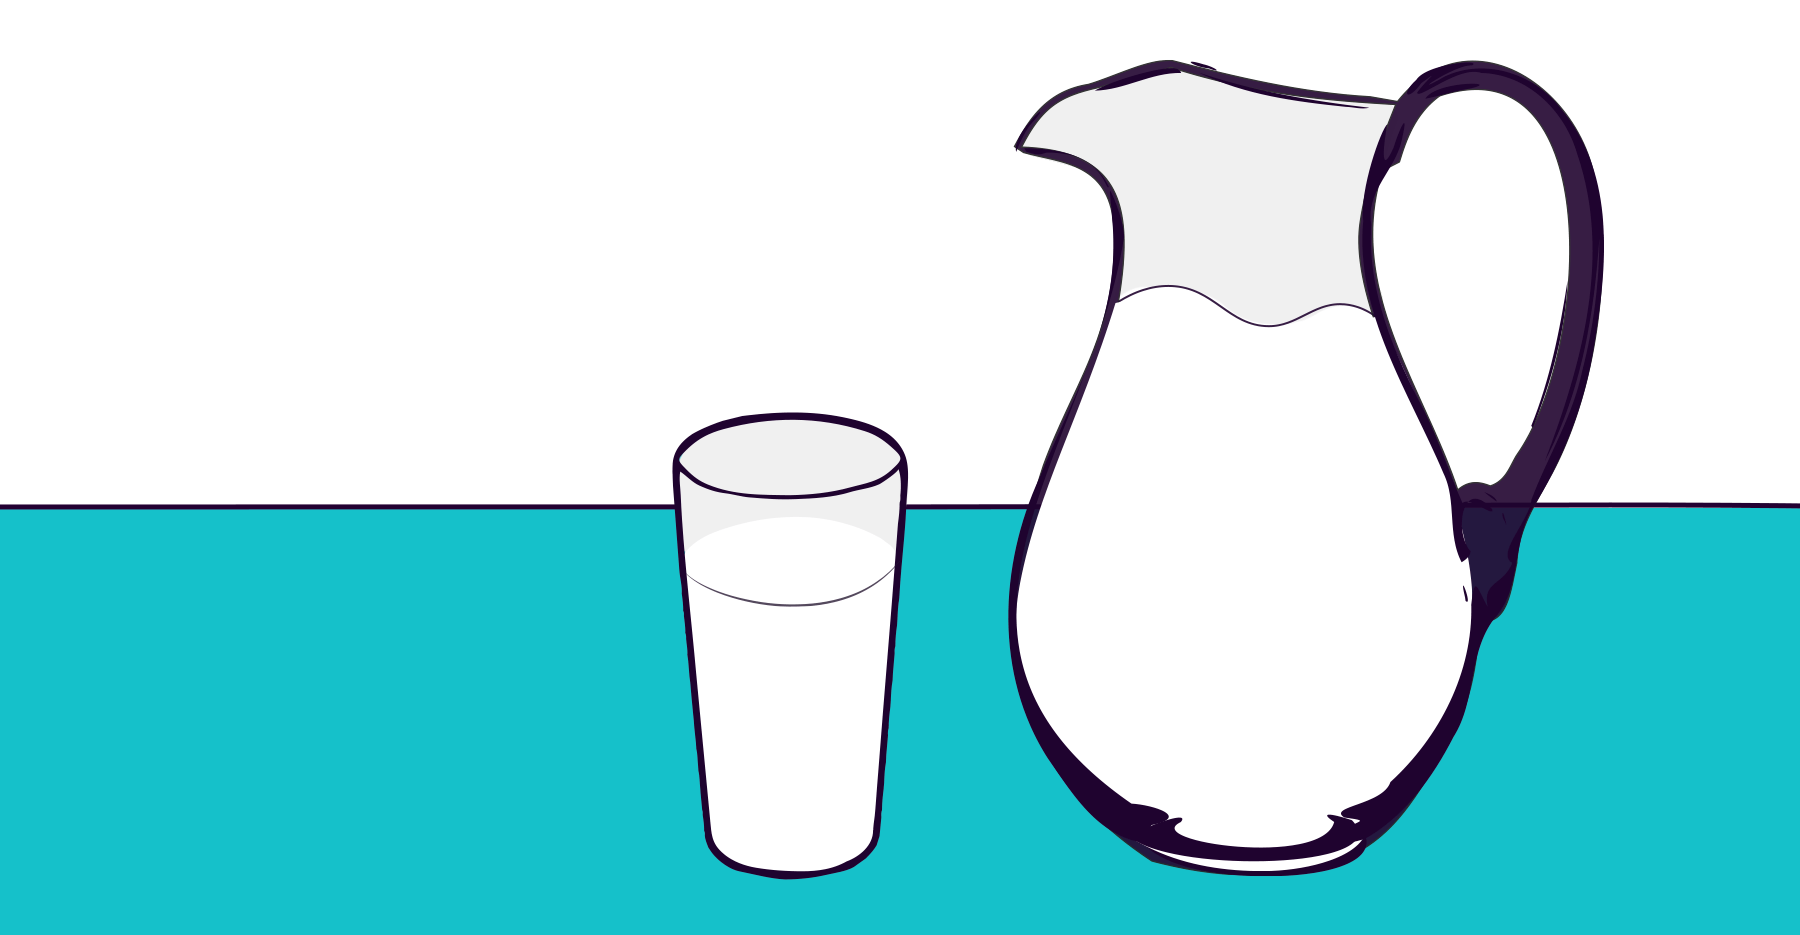 A n illustration of a glass of water and a pitcher of water